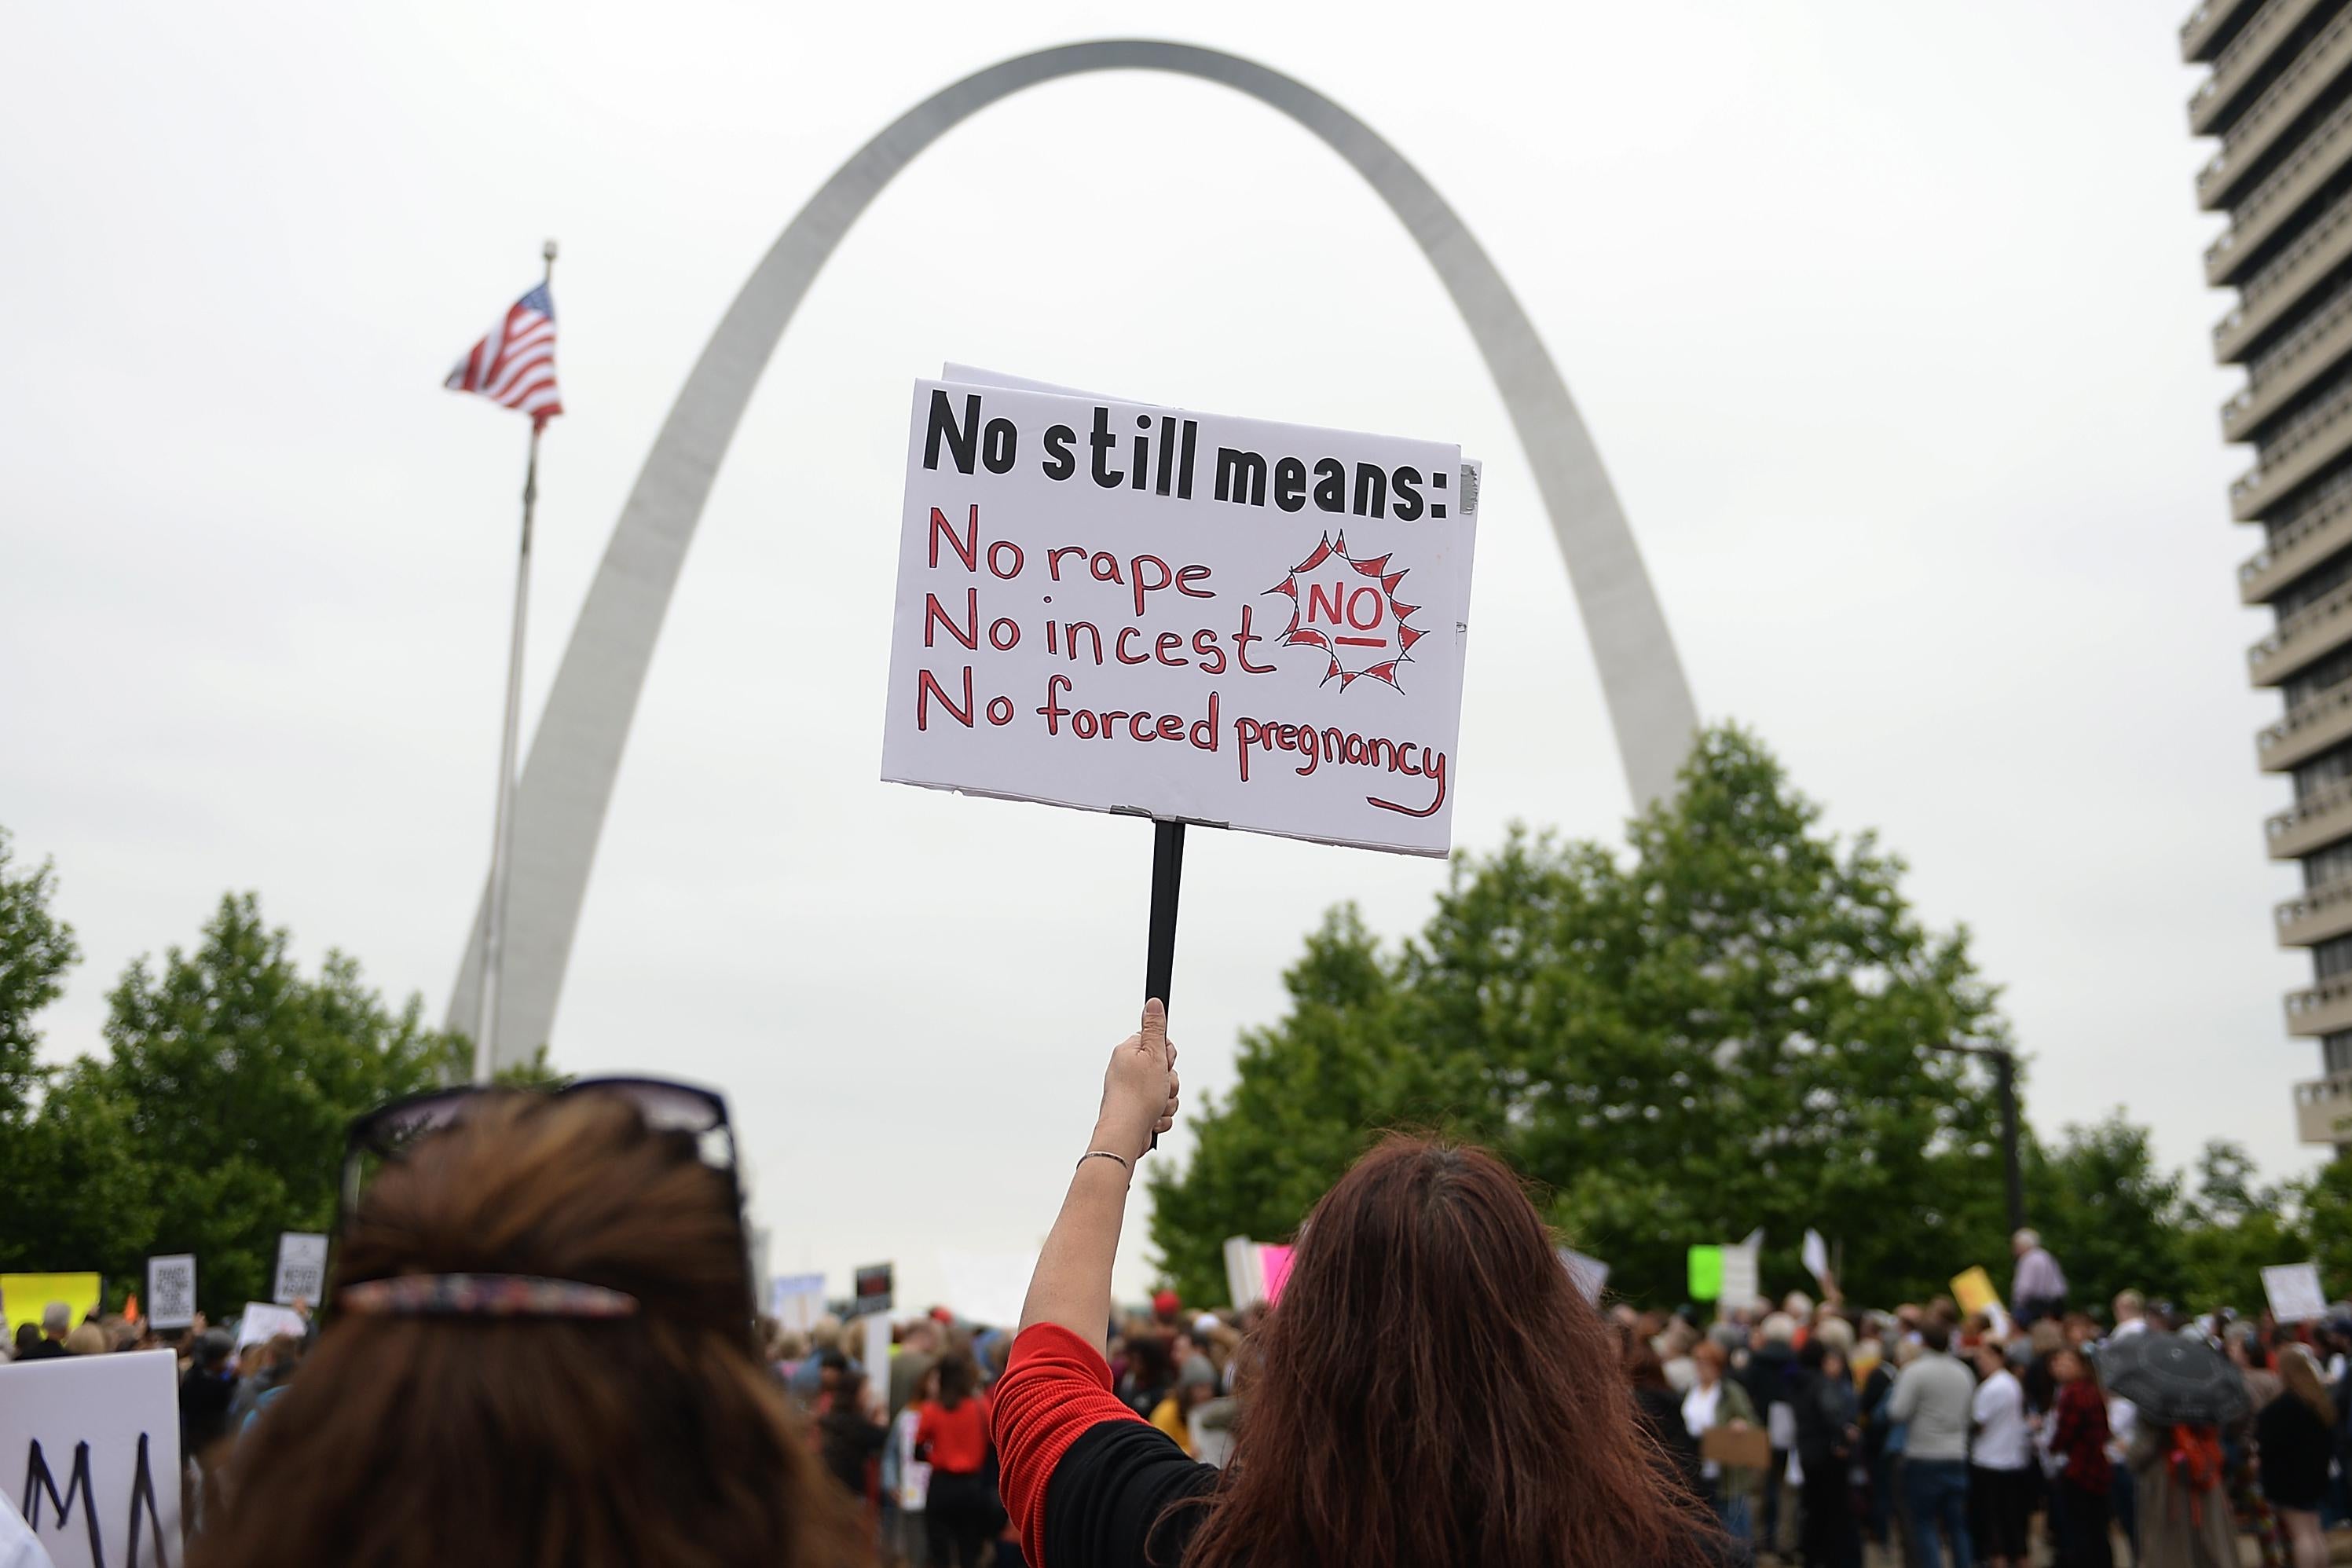 A demonstrator displays a sign during an abortion rights rally in front of the Gateway Arch in St. Louis, Missouri. 